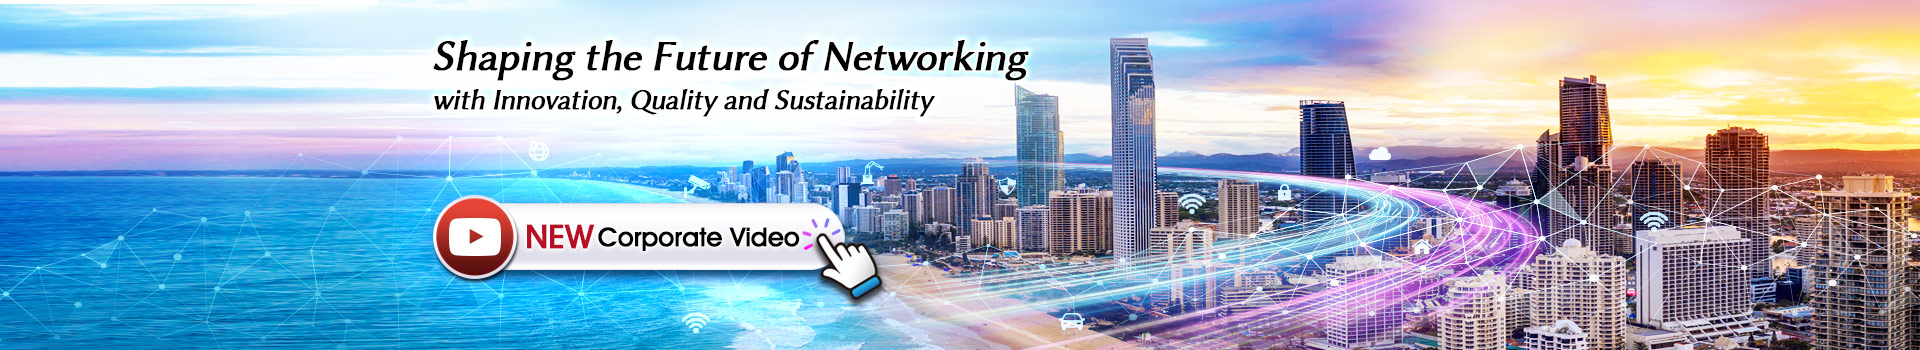 PLANET New Corporate Video | Shaping the Future of Networking with Innovation, Quality and Sustainability